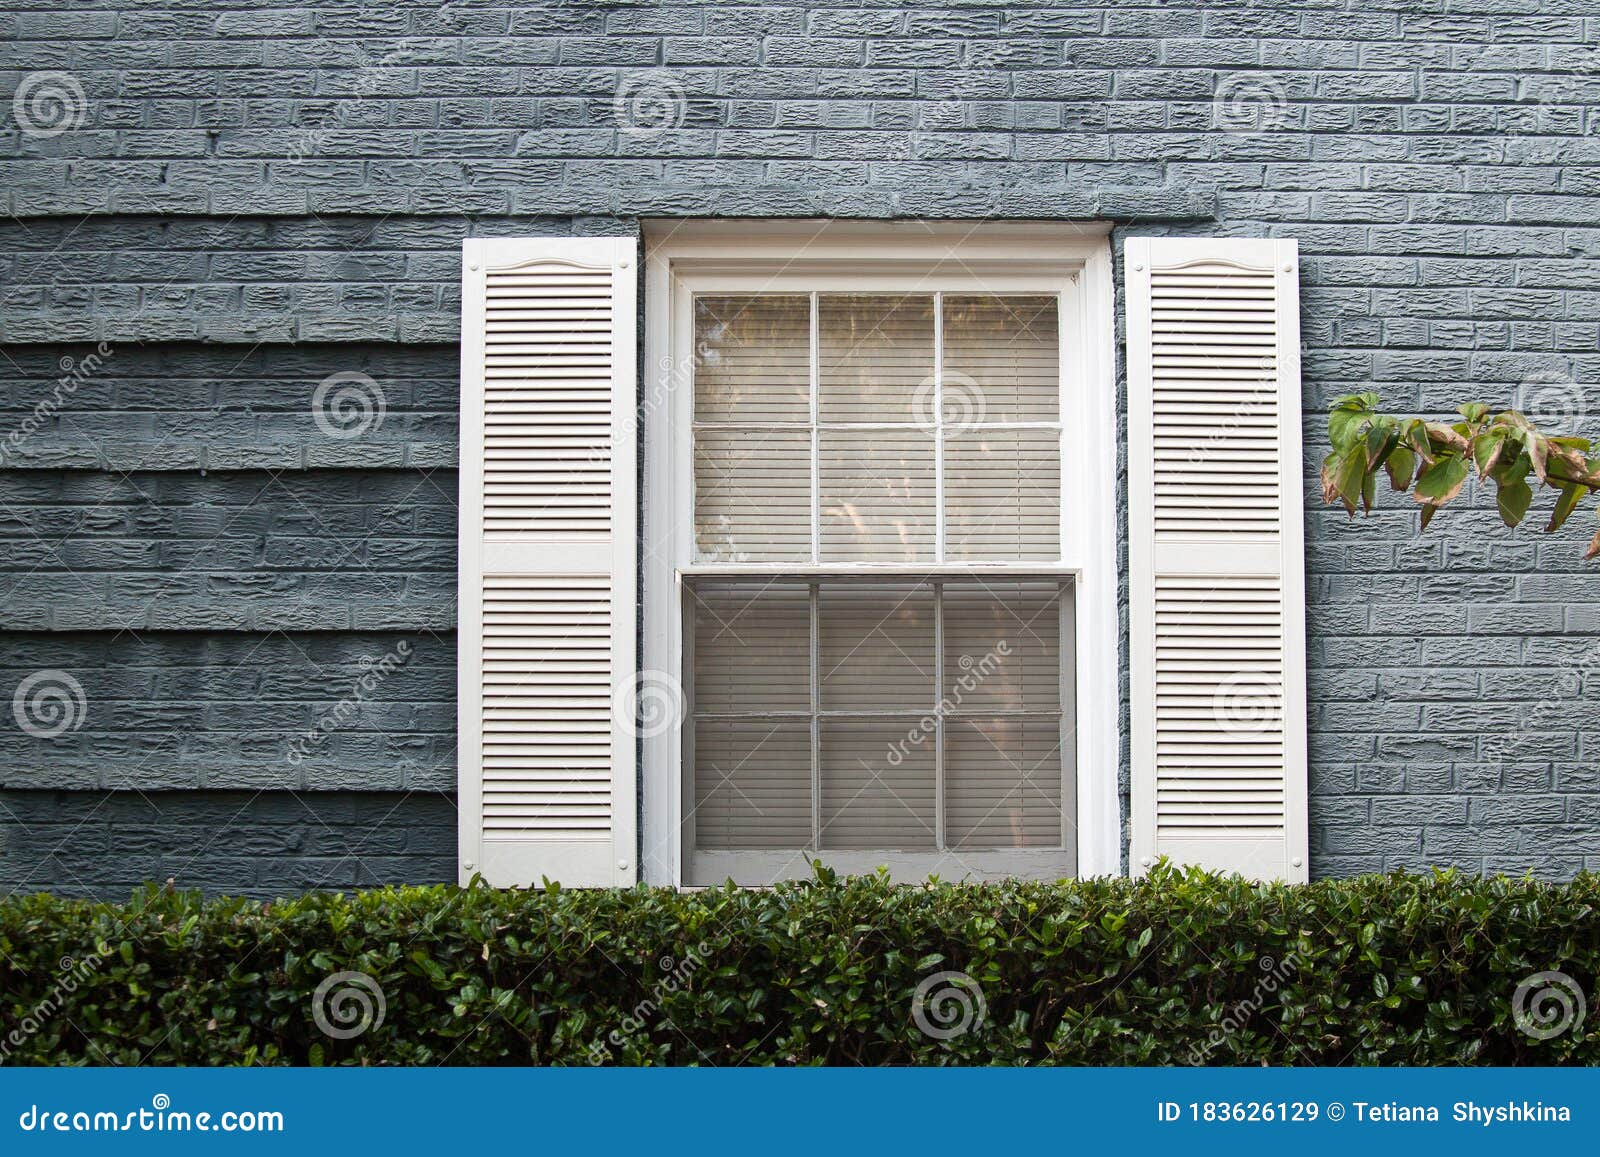 american casement window on the grey brick wall with green hedge